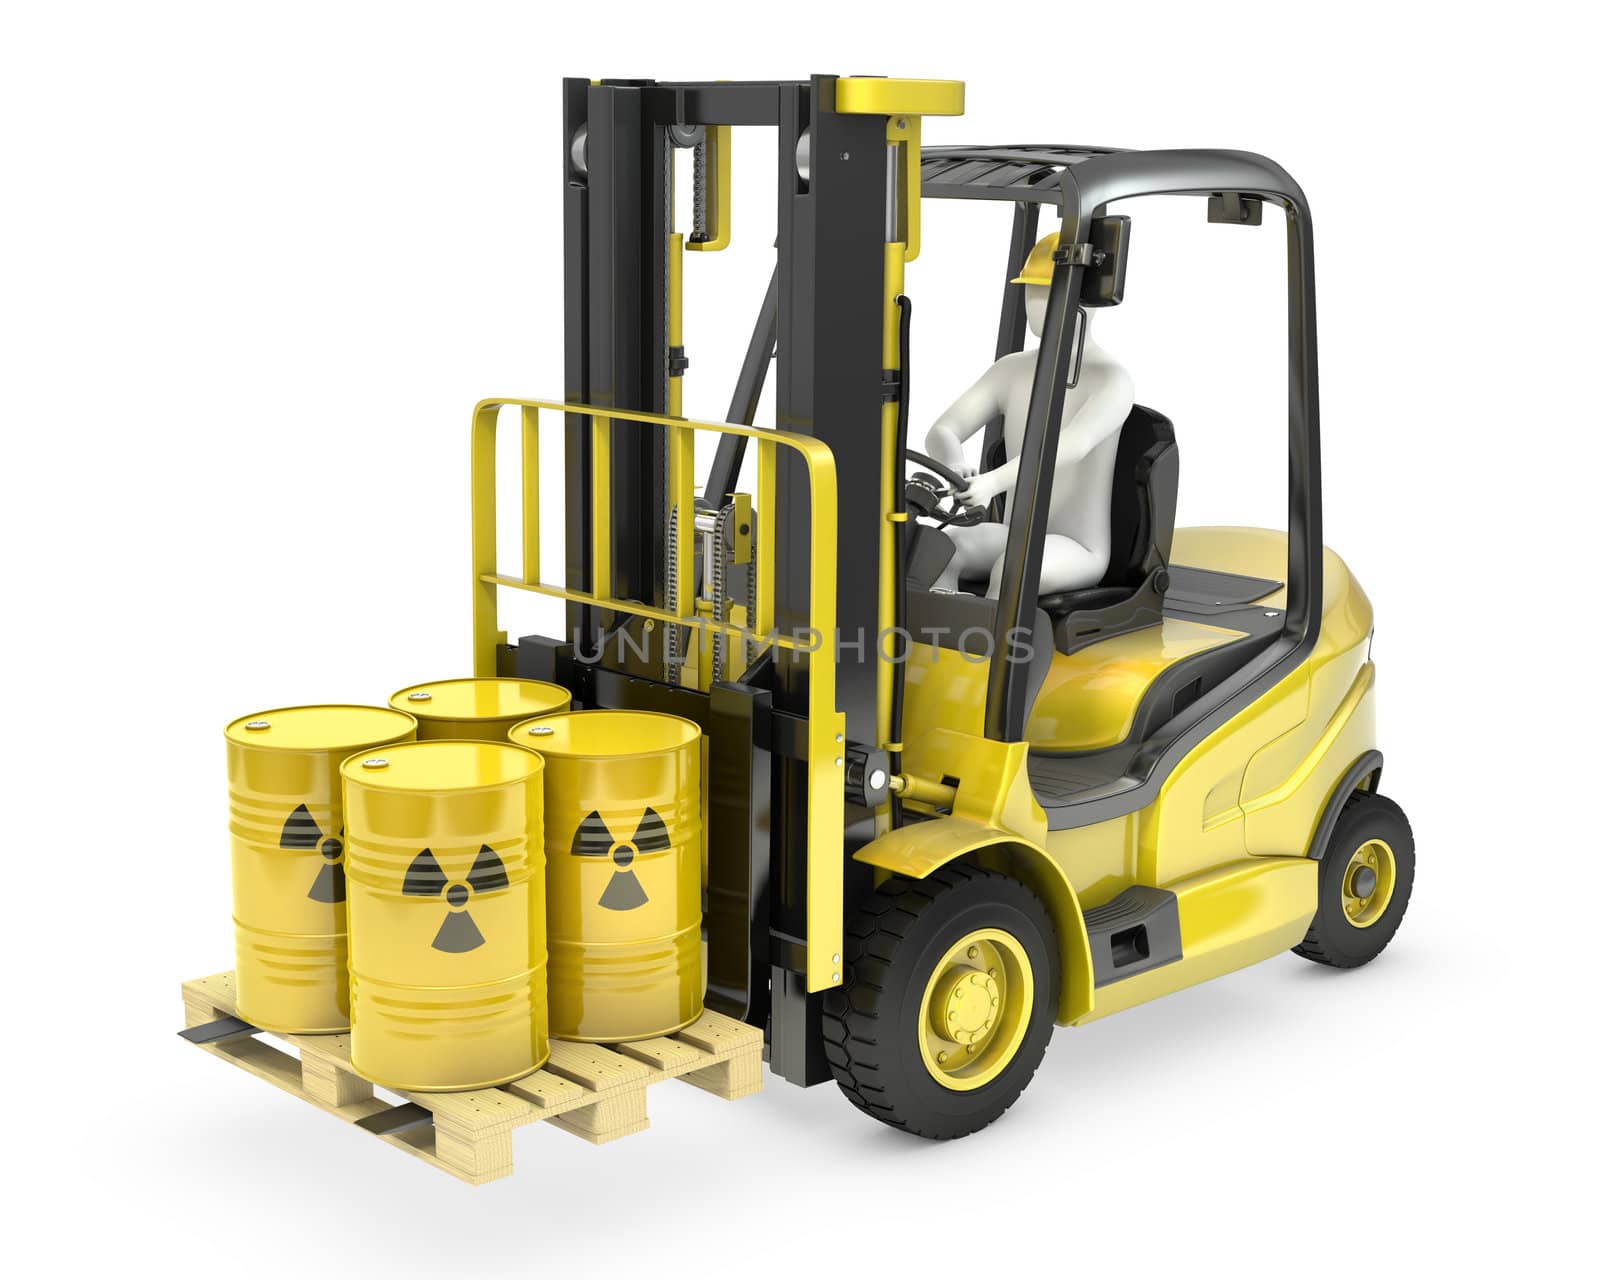 Fork lift truck with radioactive barrels, isolated on white background